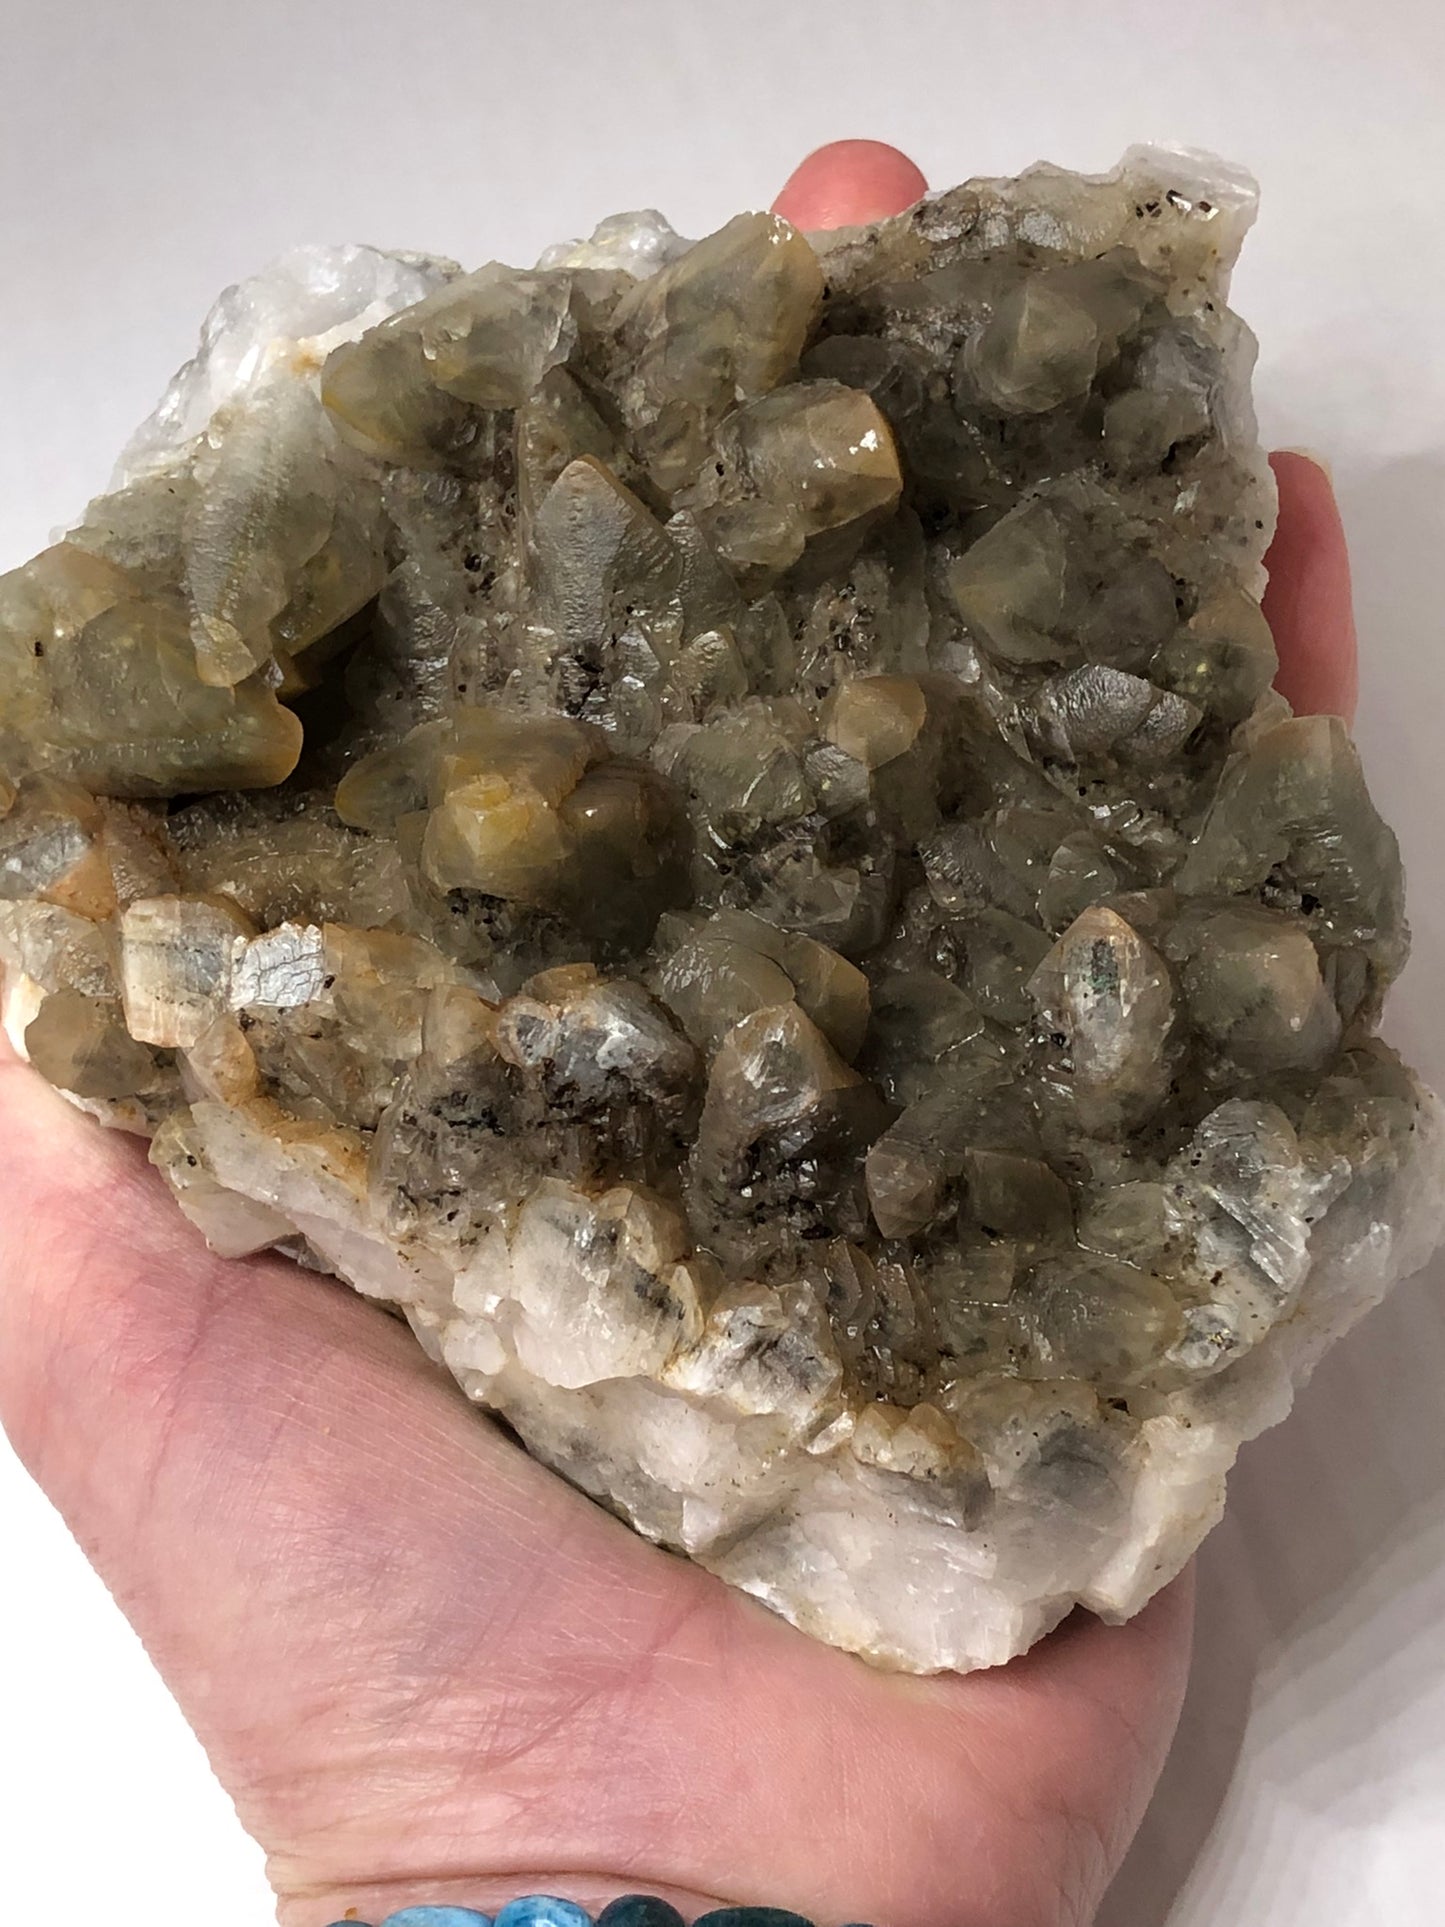 Dogs tooth calcite